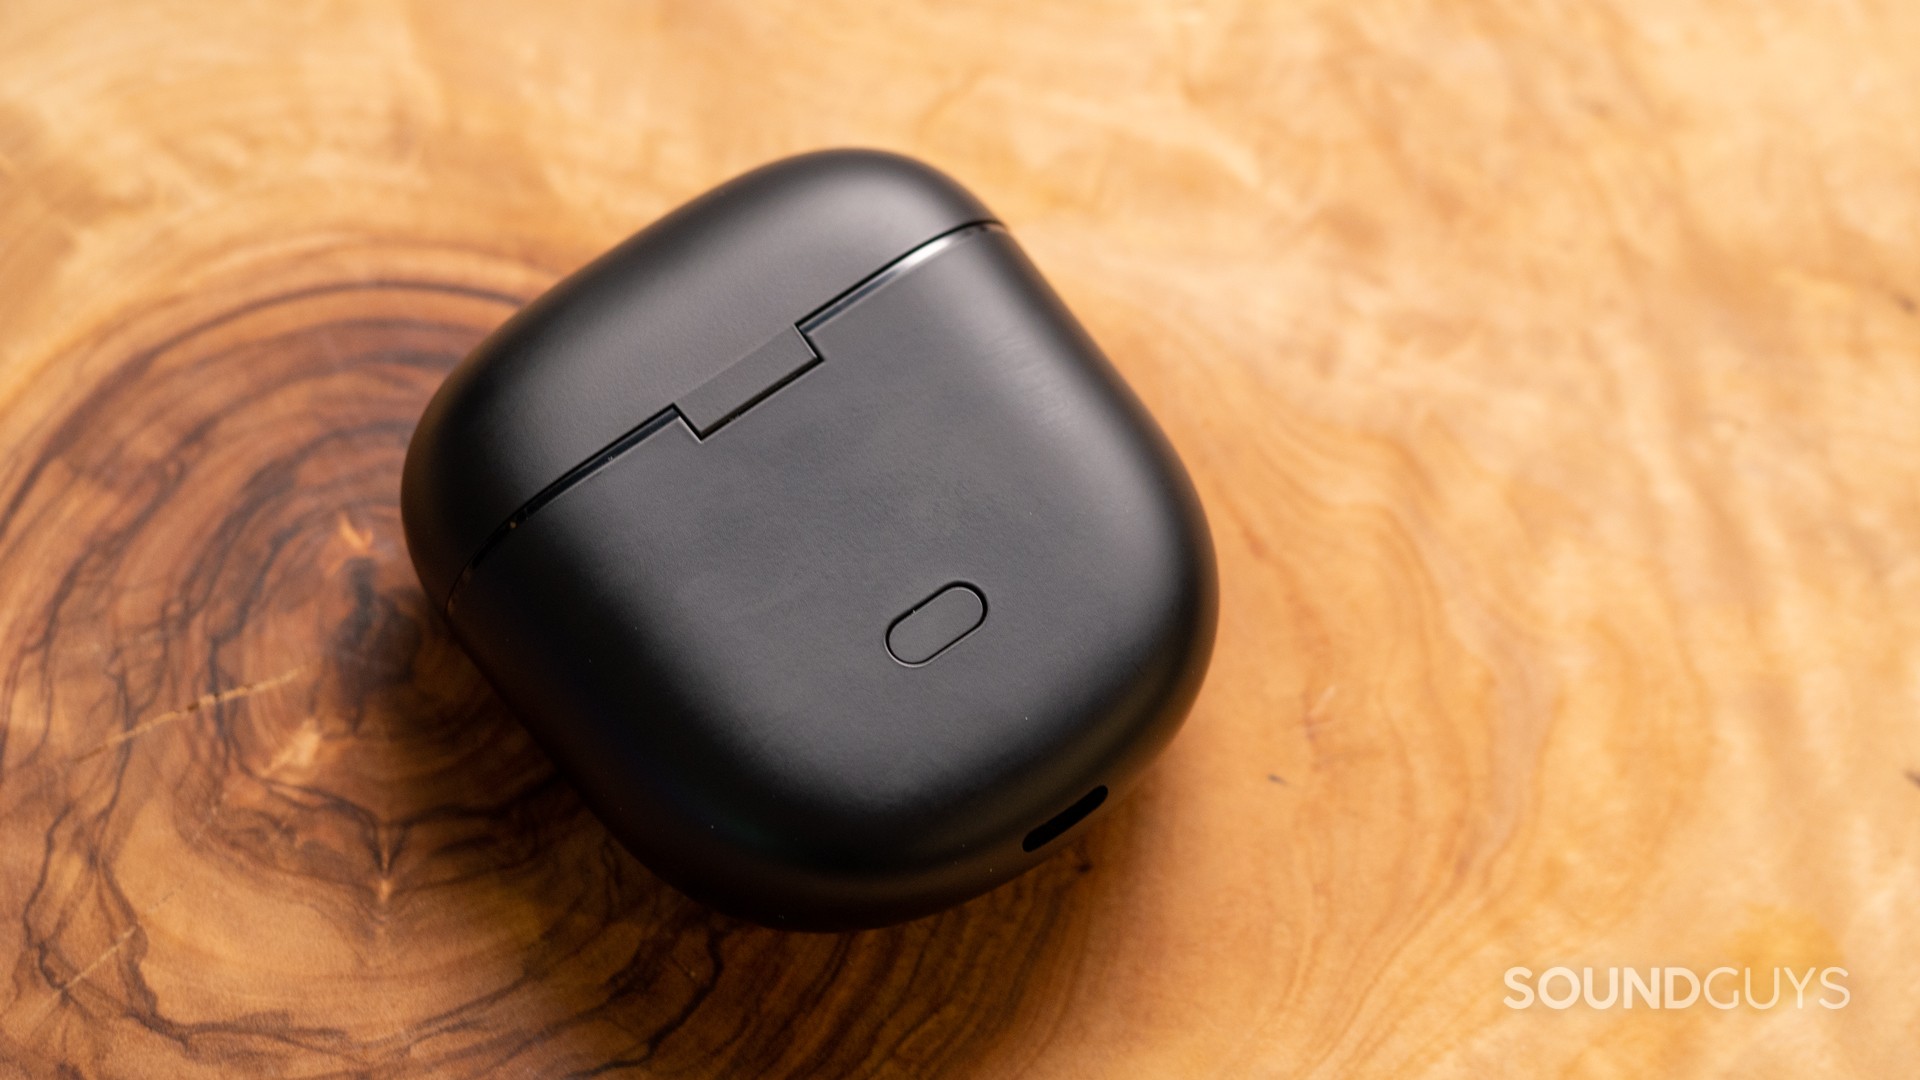 The Bose QuietComfort Ultra Earbuds' pairing button is located at the back of the charging case.